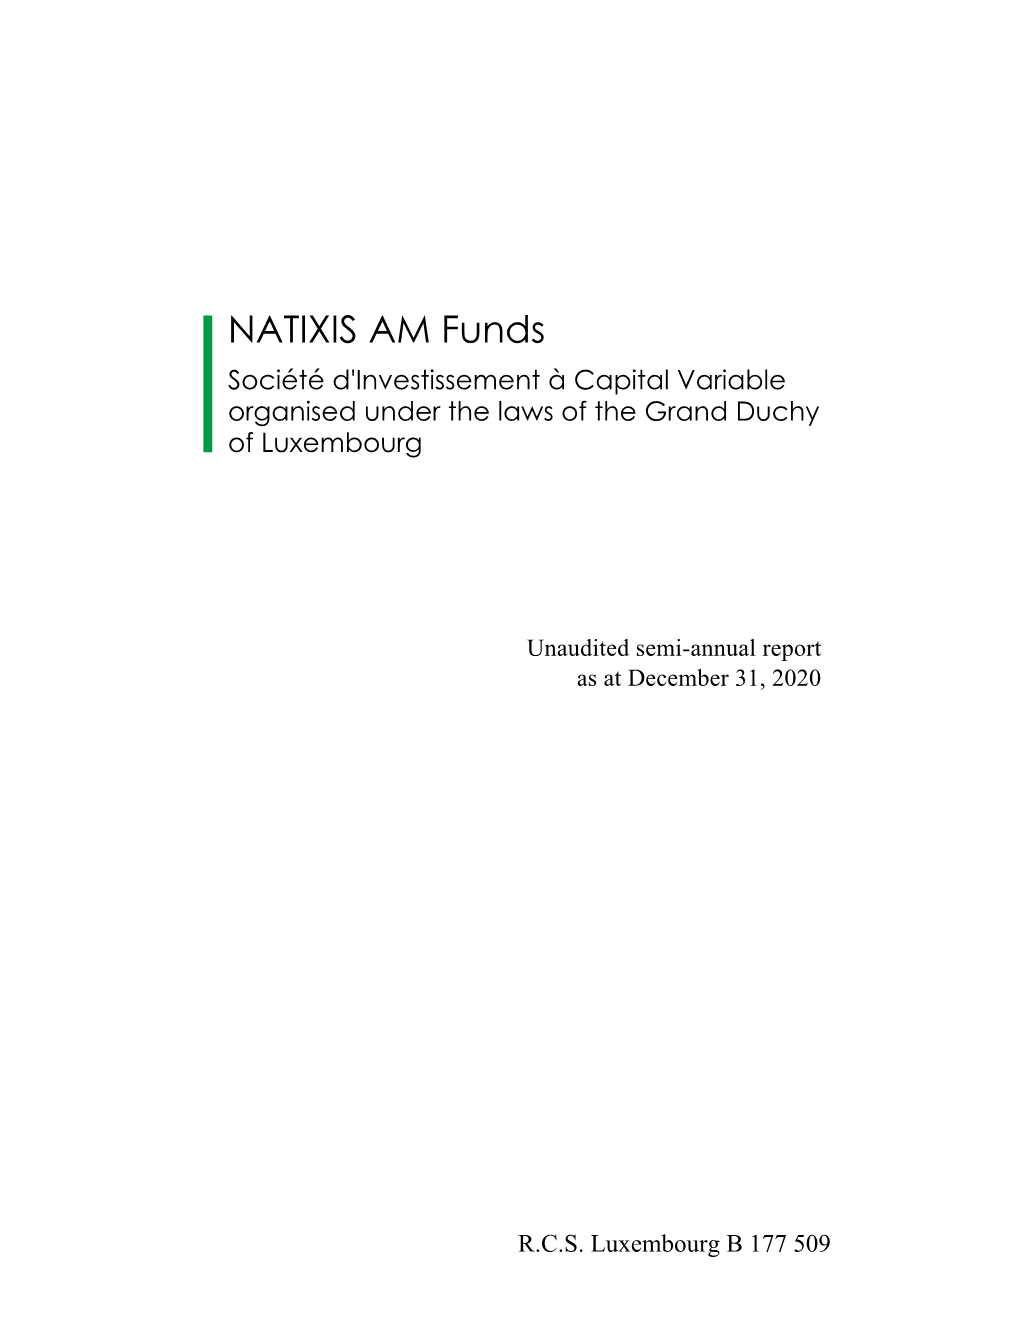 NATIXIS AM Funds Société D'investissement À Capital Variable Organised Under the Laws of the Grand Duchy of Luxembourg